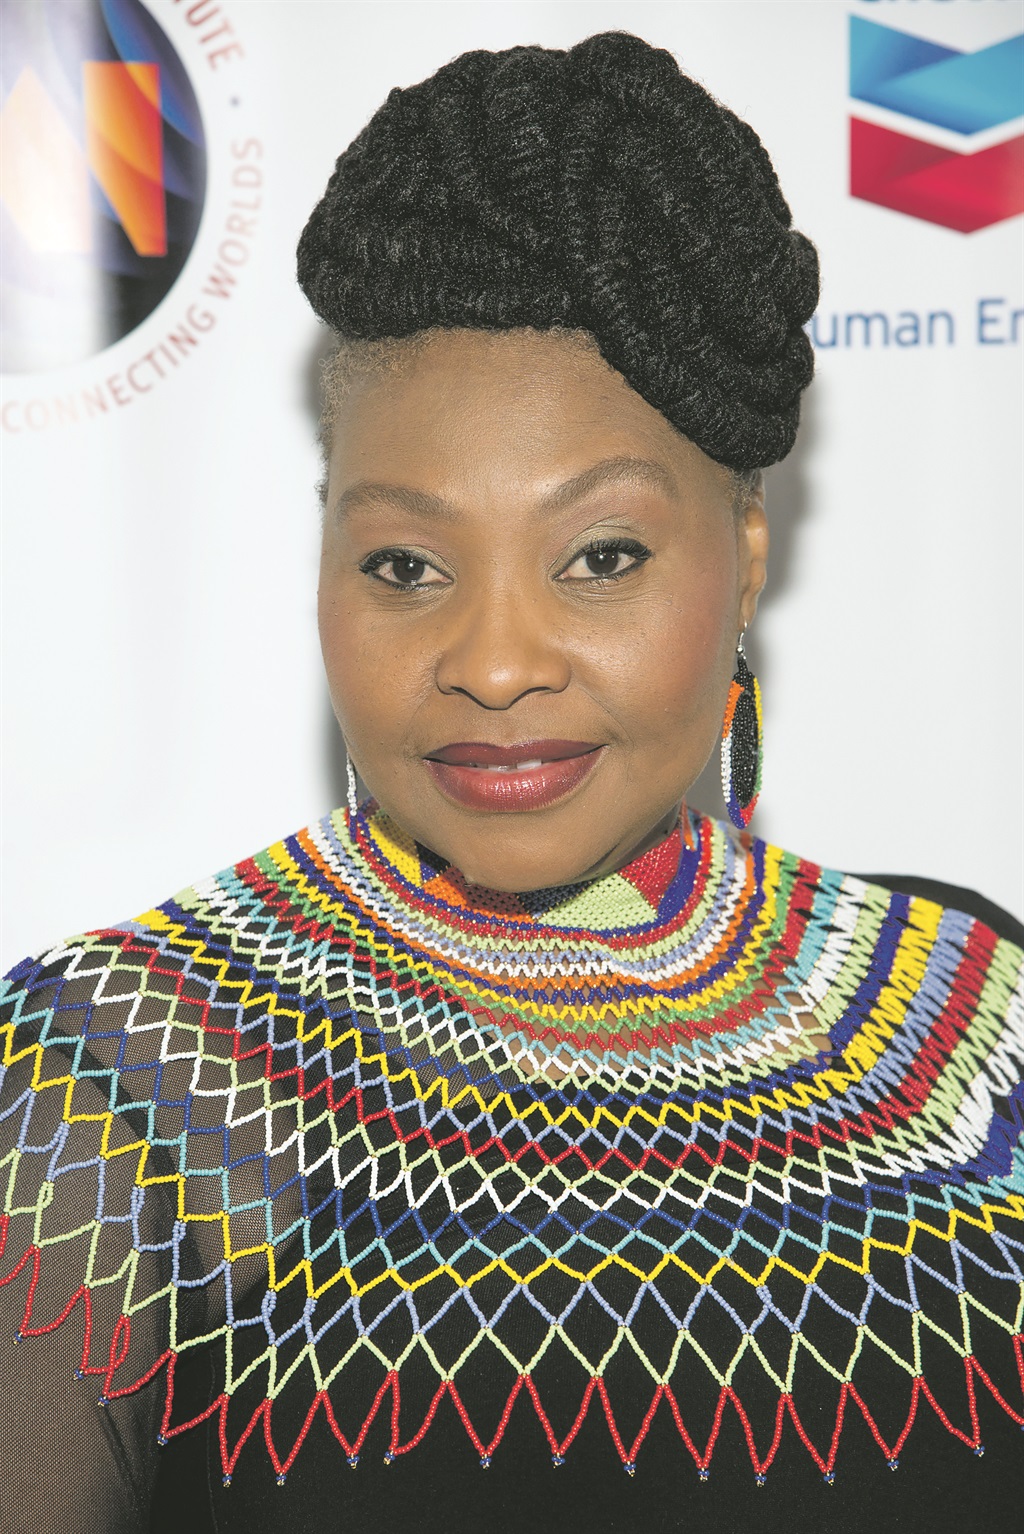 Veteran singer Yvonne Chaka Chaka is on the judging panel.          Photo by           Mike Pont/WireImage